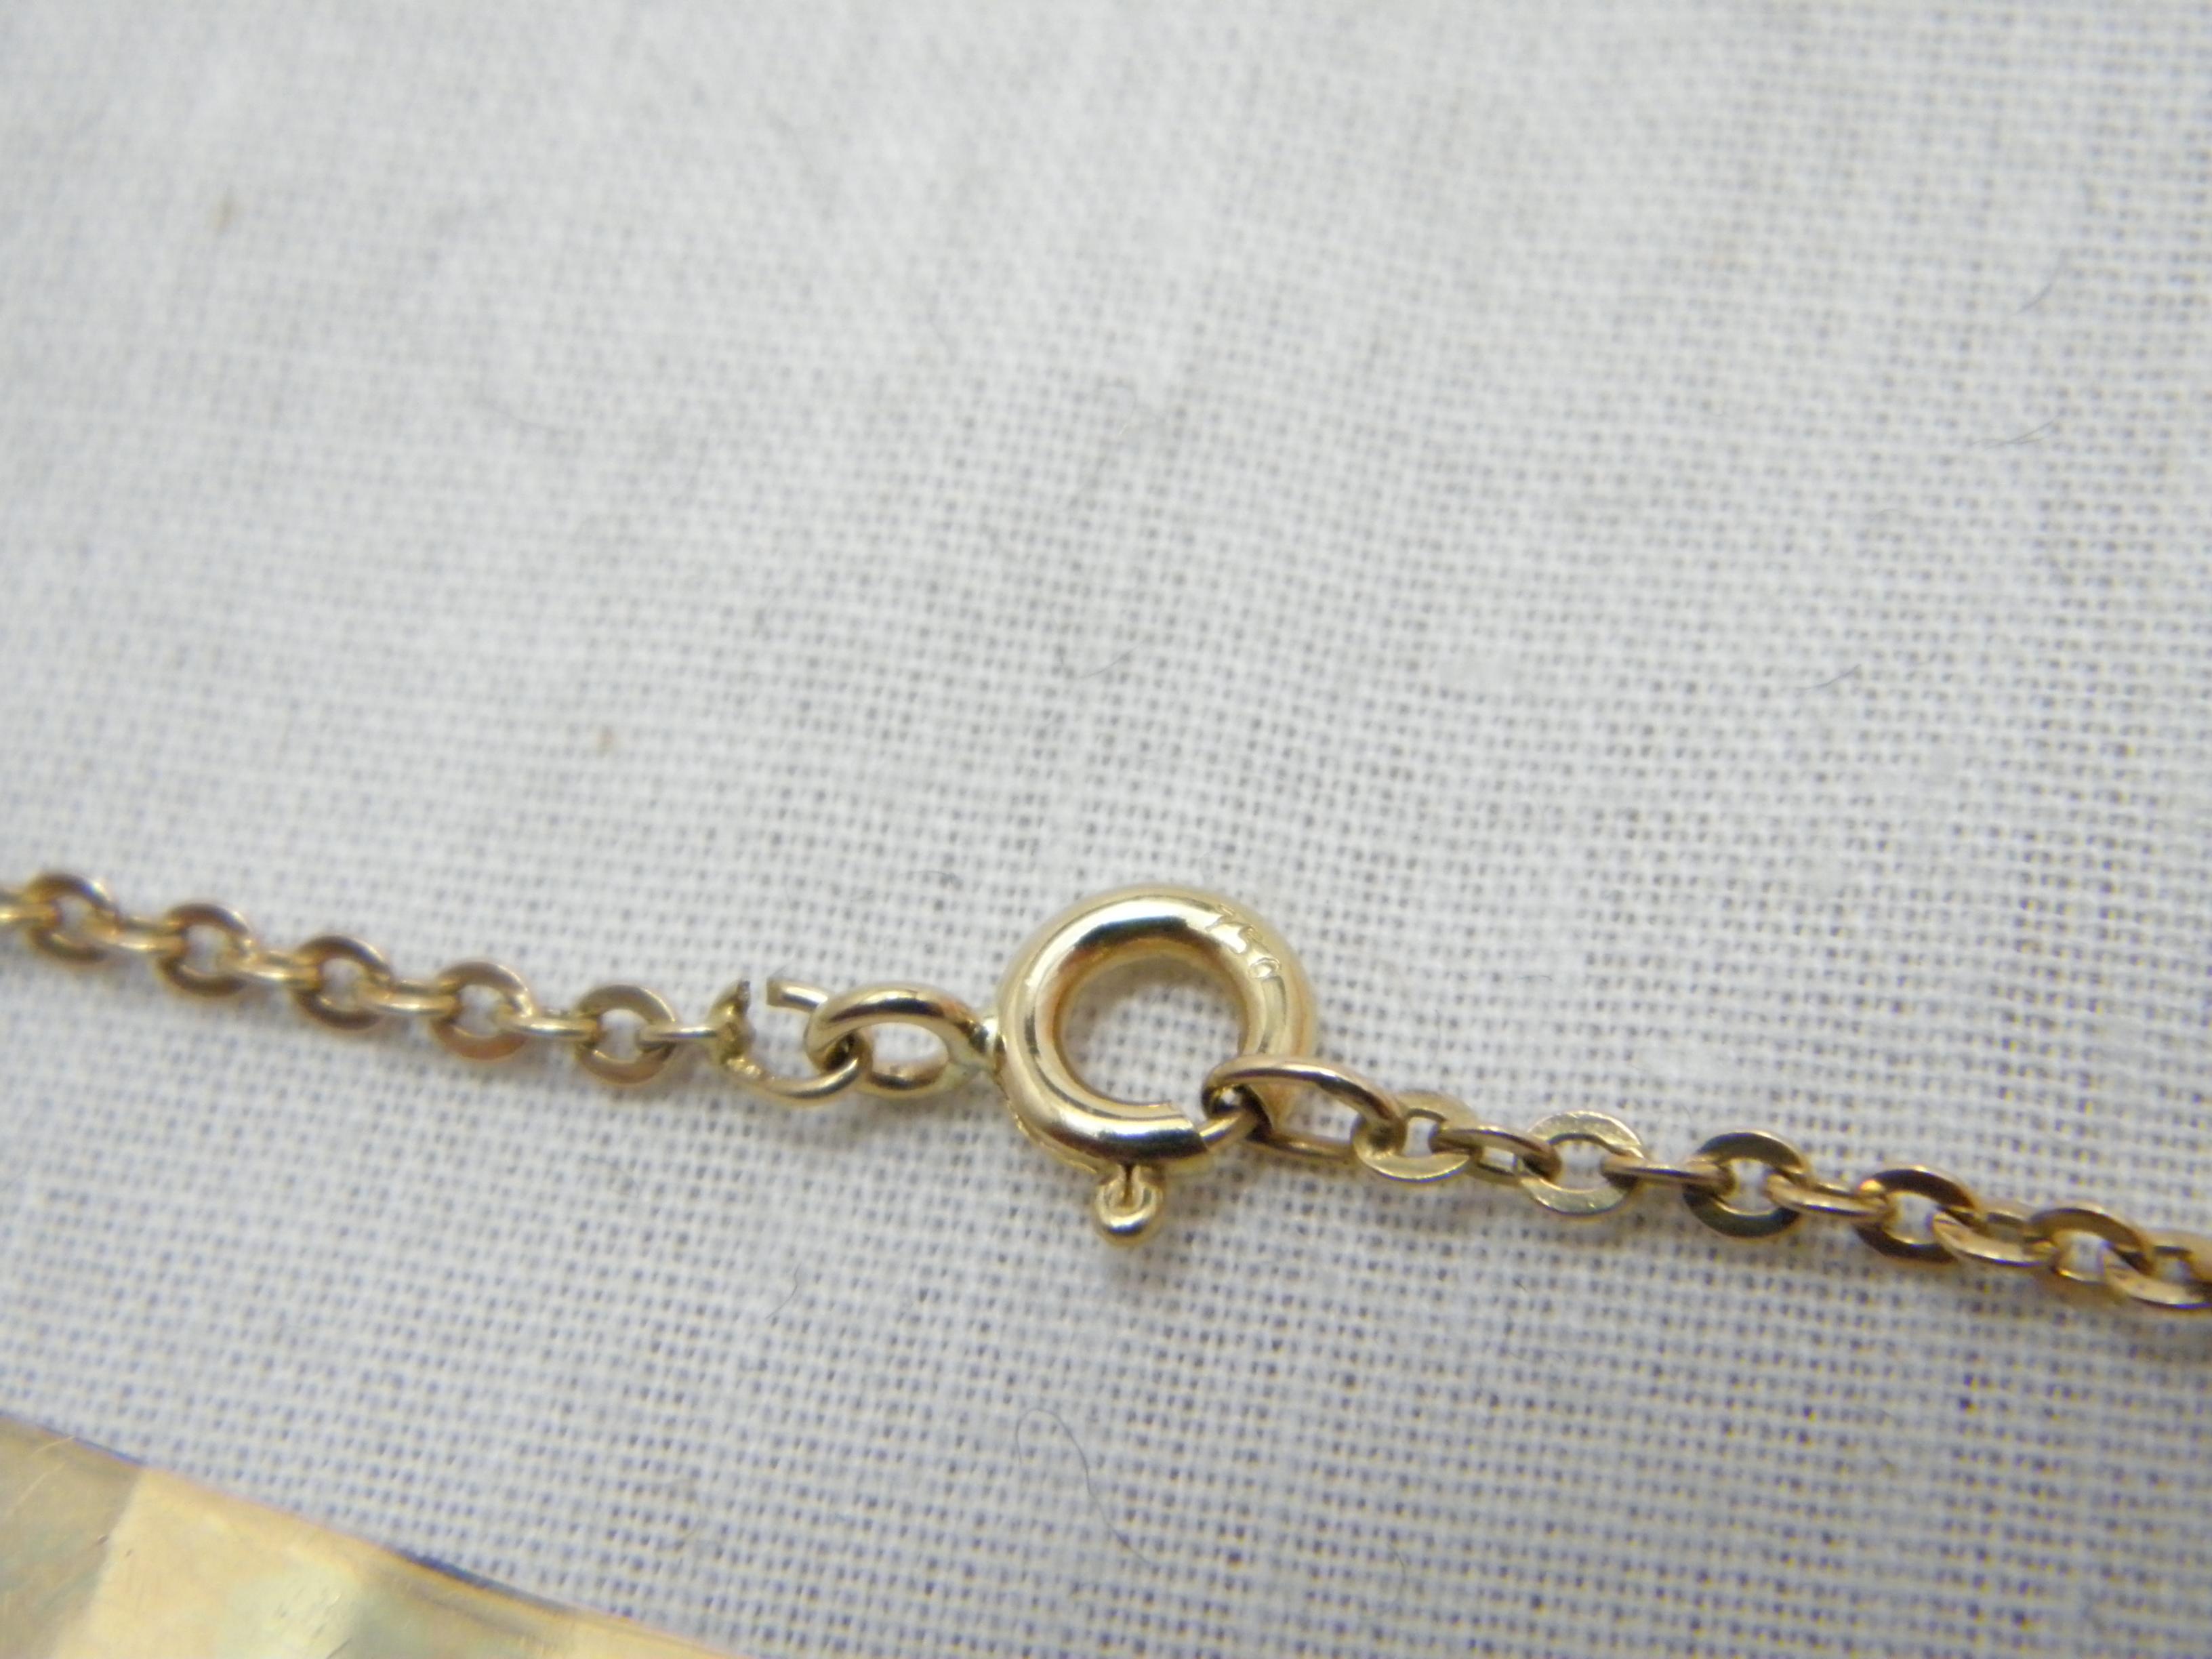 Antique 18ct Gold Baby ID Bracelet c1890 750 Purity Rose Victorian In Good Condition For Sale In Camelford, GB